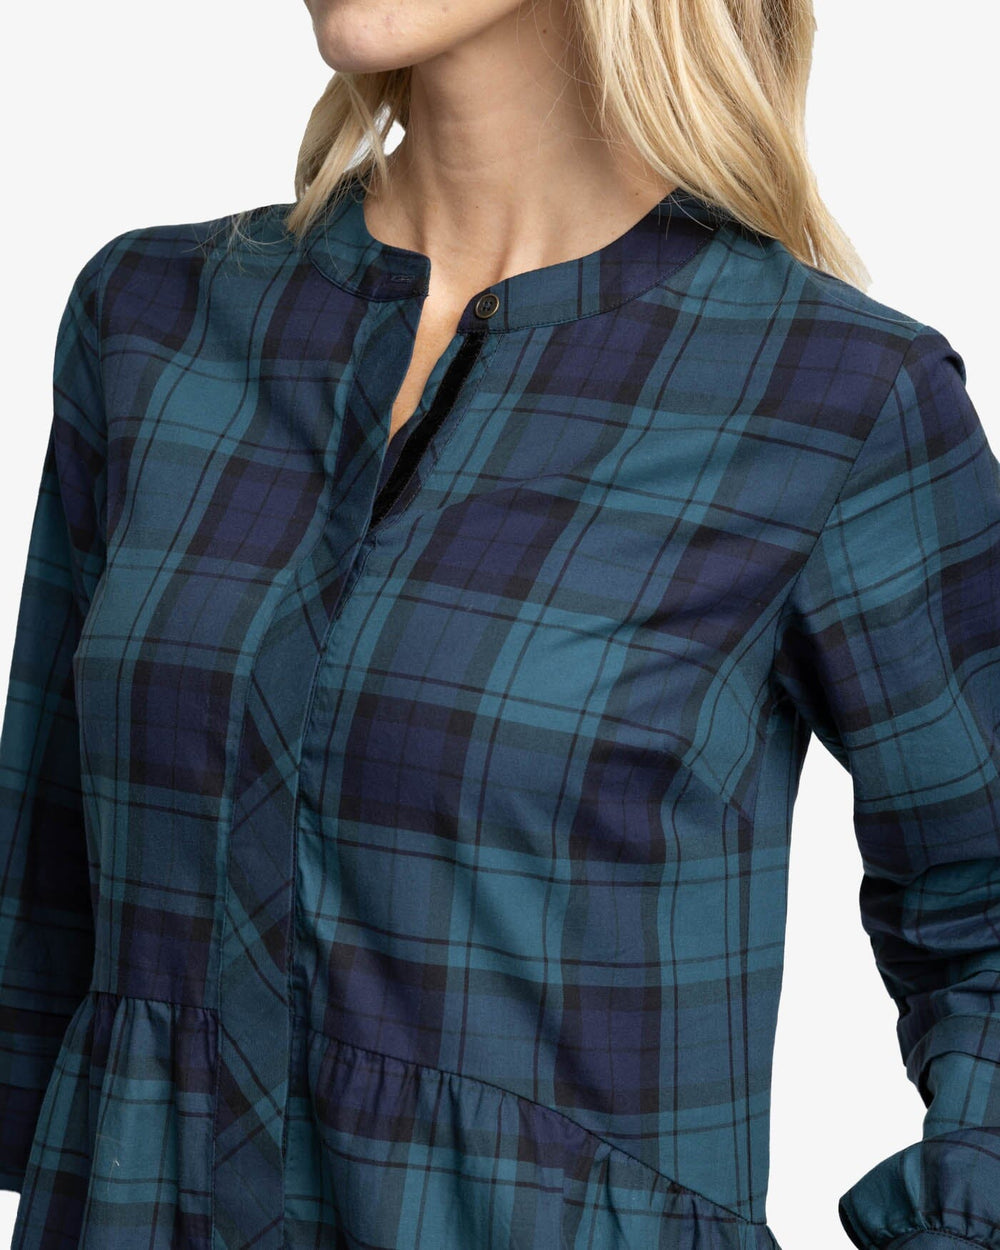 The detail view of the Southern Tide Lendy Plaid Dress by Southern Tide - Georgian Bay Green